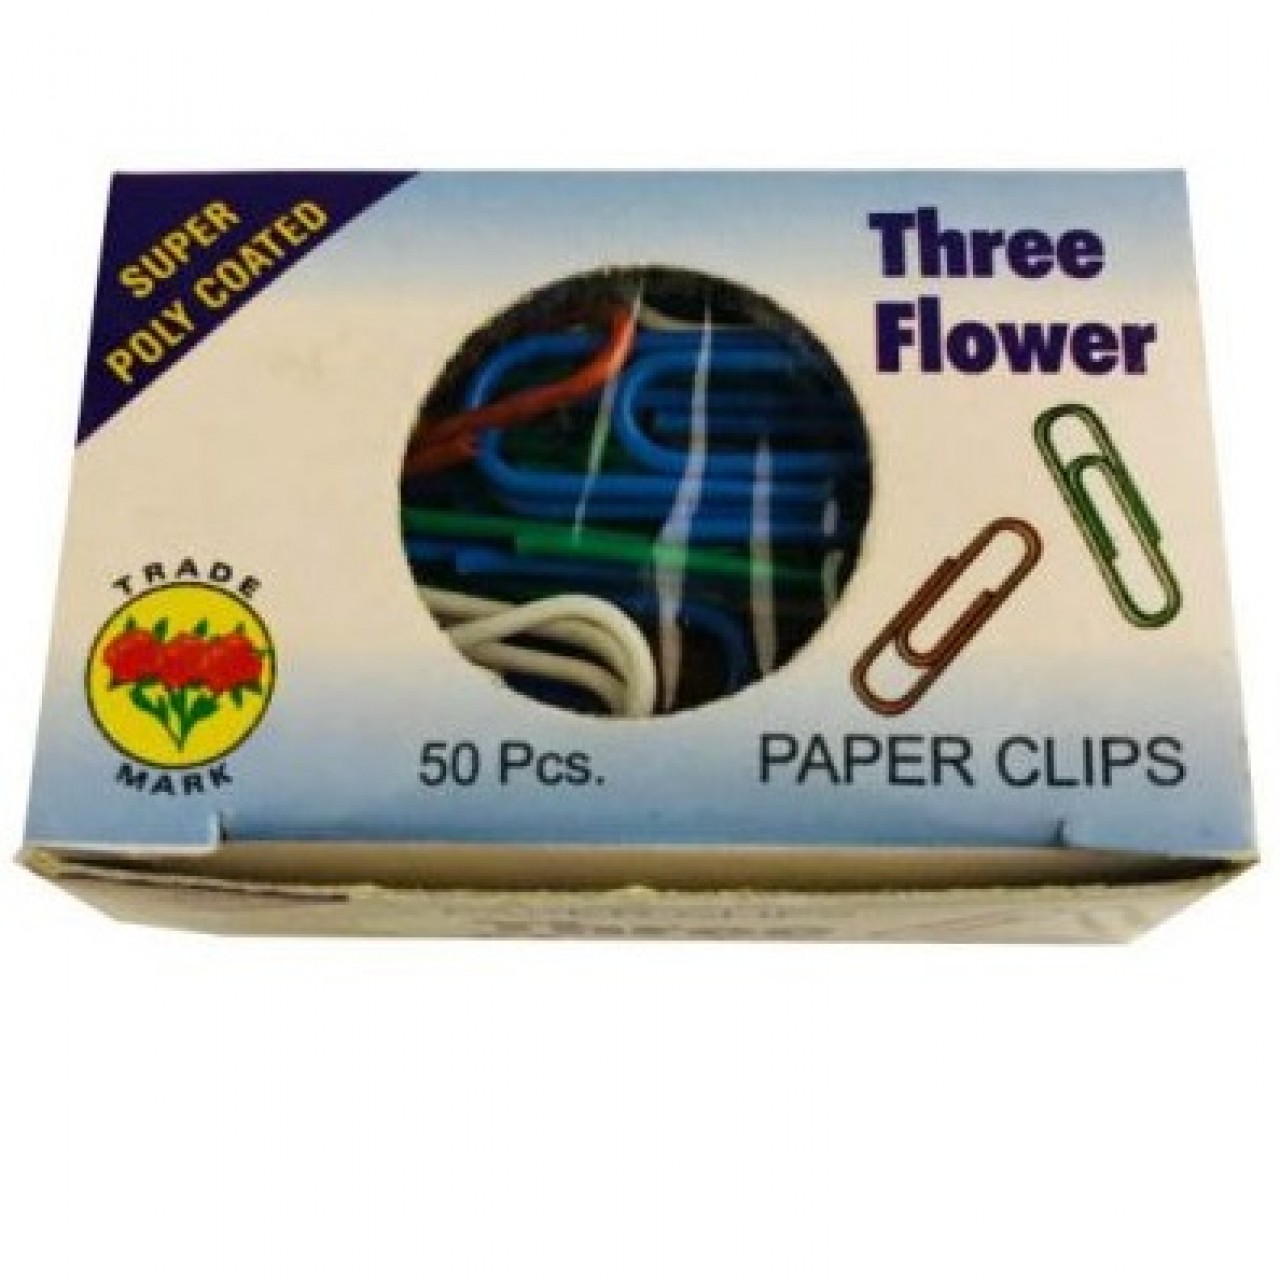 Poly Coated Paper Clips By Three Flower - Multicolor 50Pcs